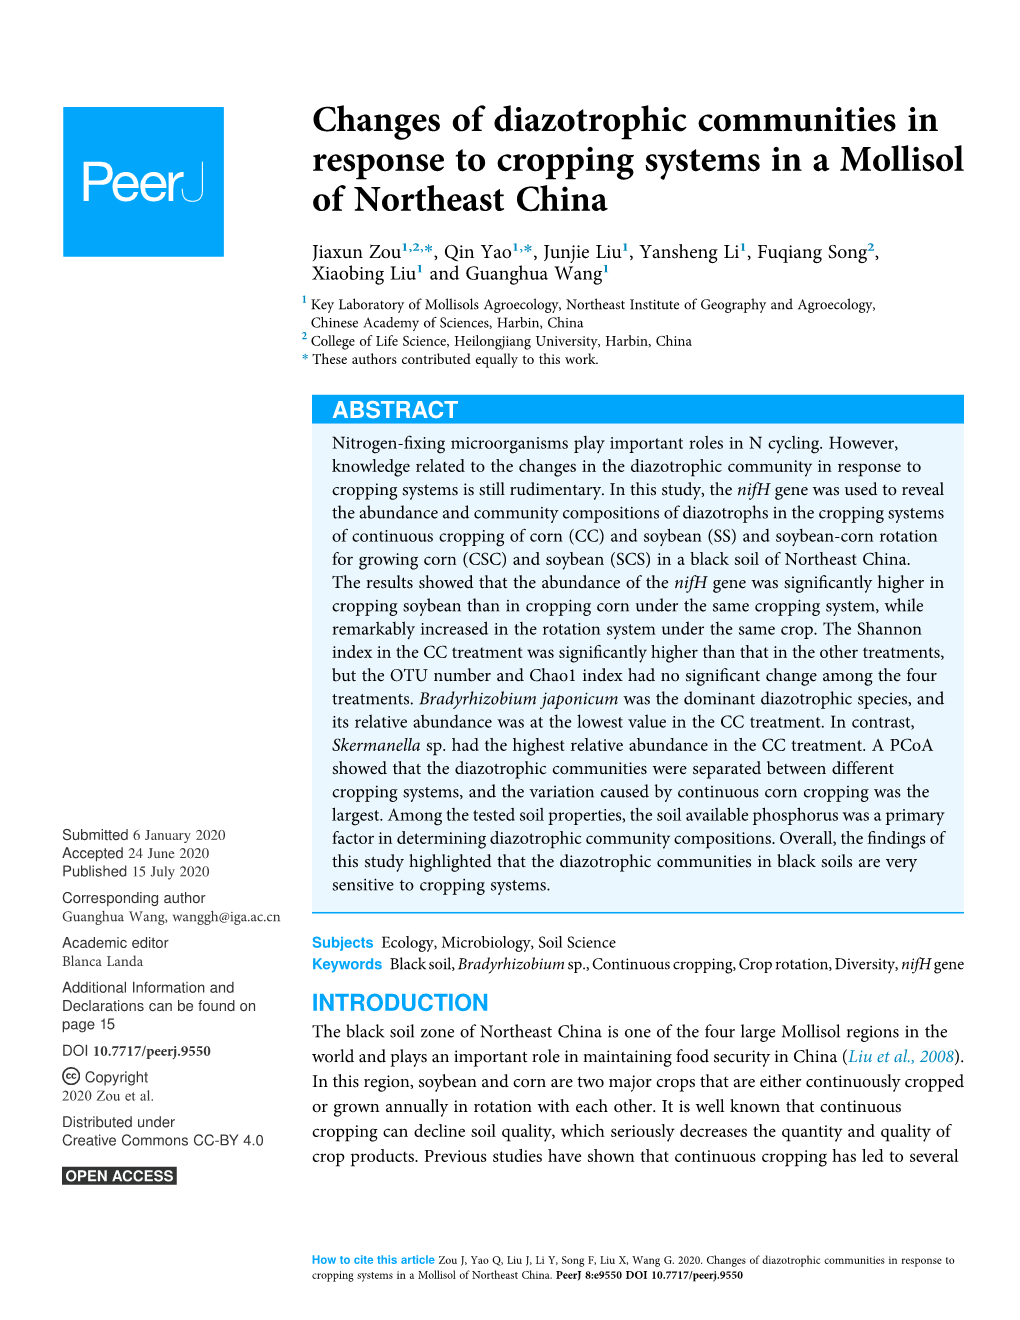 Changes of Diazotrophic Communities in Response to Cropping Systems in a Mollisol of Northeast China